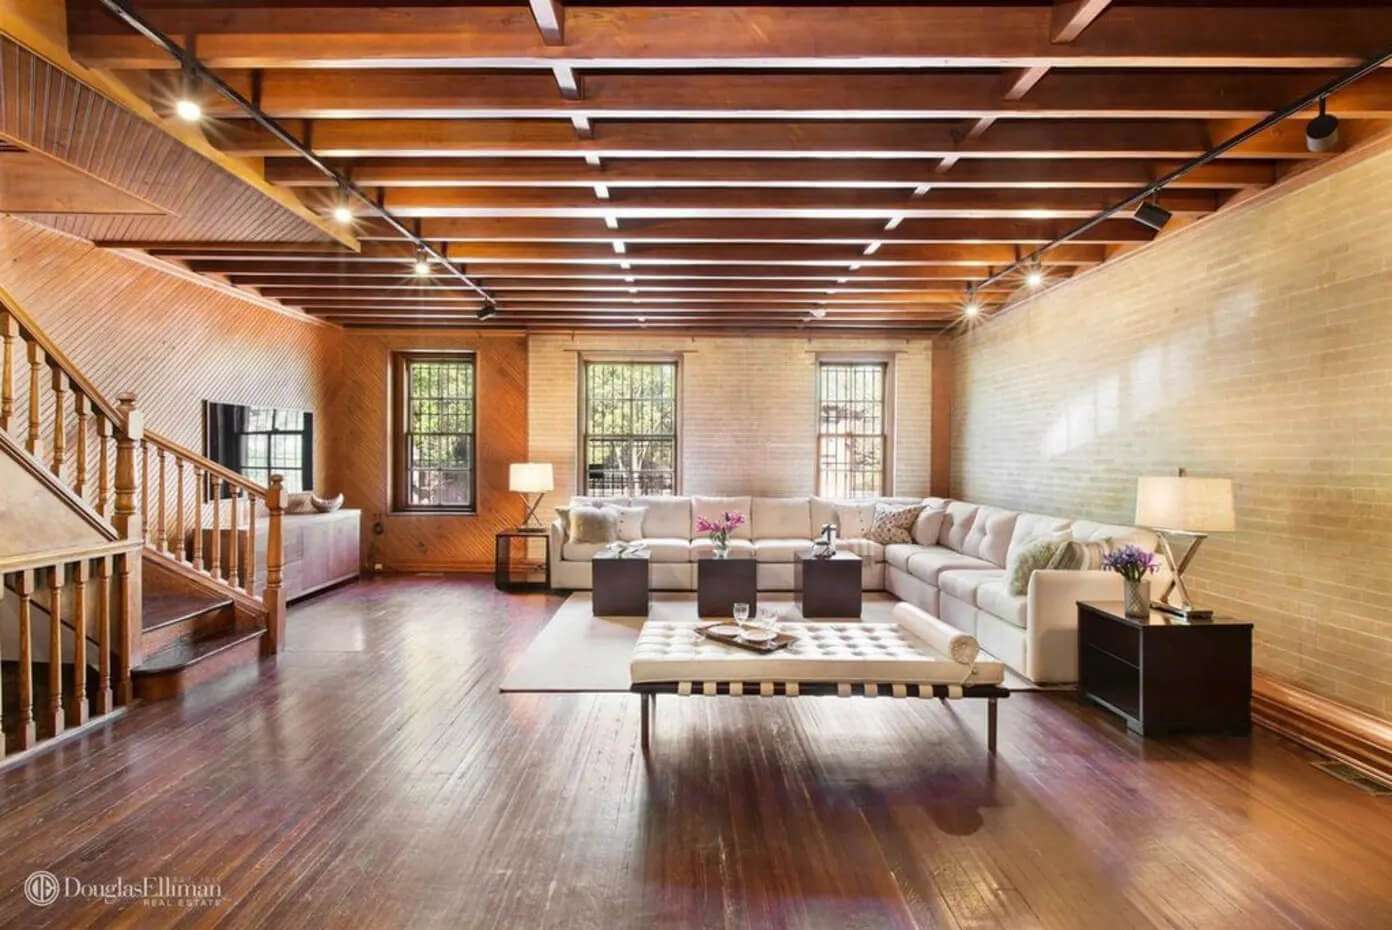 The Antique Classy Living Area of Chris’s Brooklyn Mansion